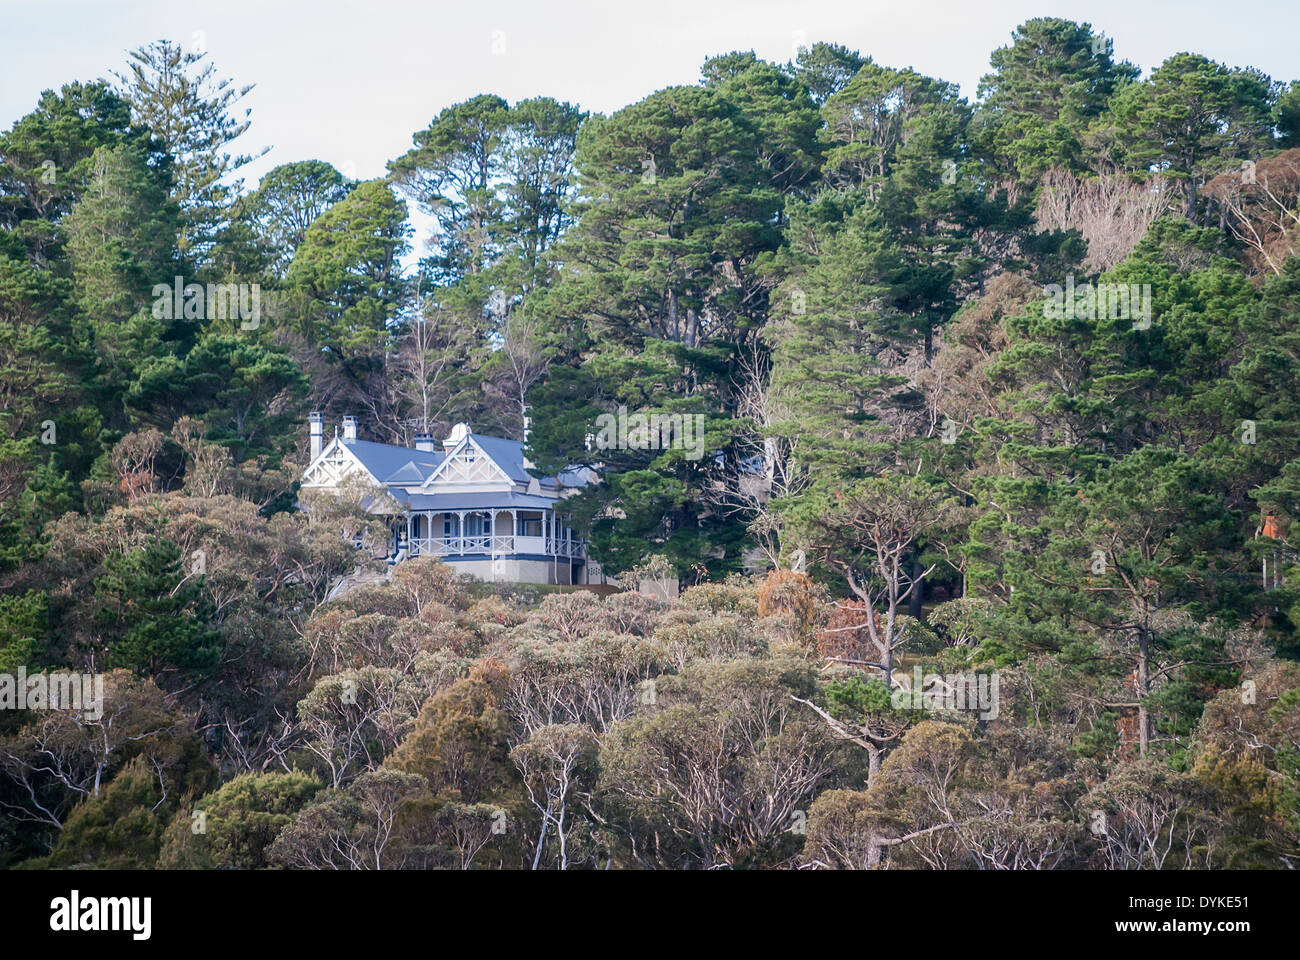 A magnificent country house nestled in bushland in the beautiful Blue Mountains west of Sydney Australia Stock Photo